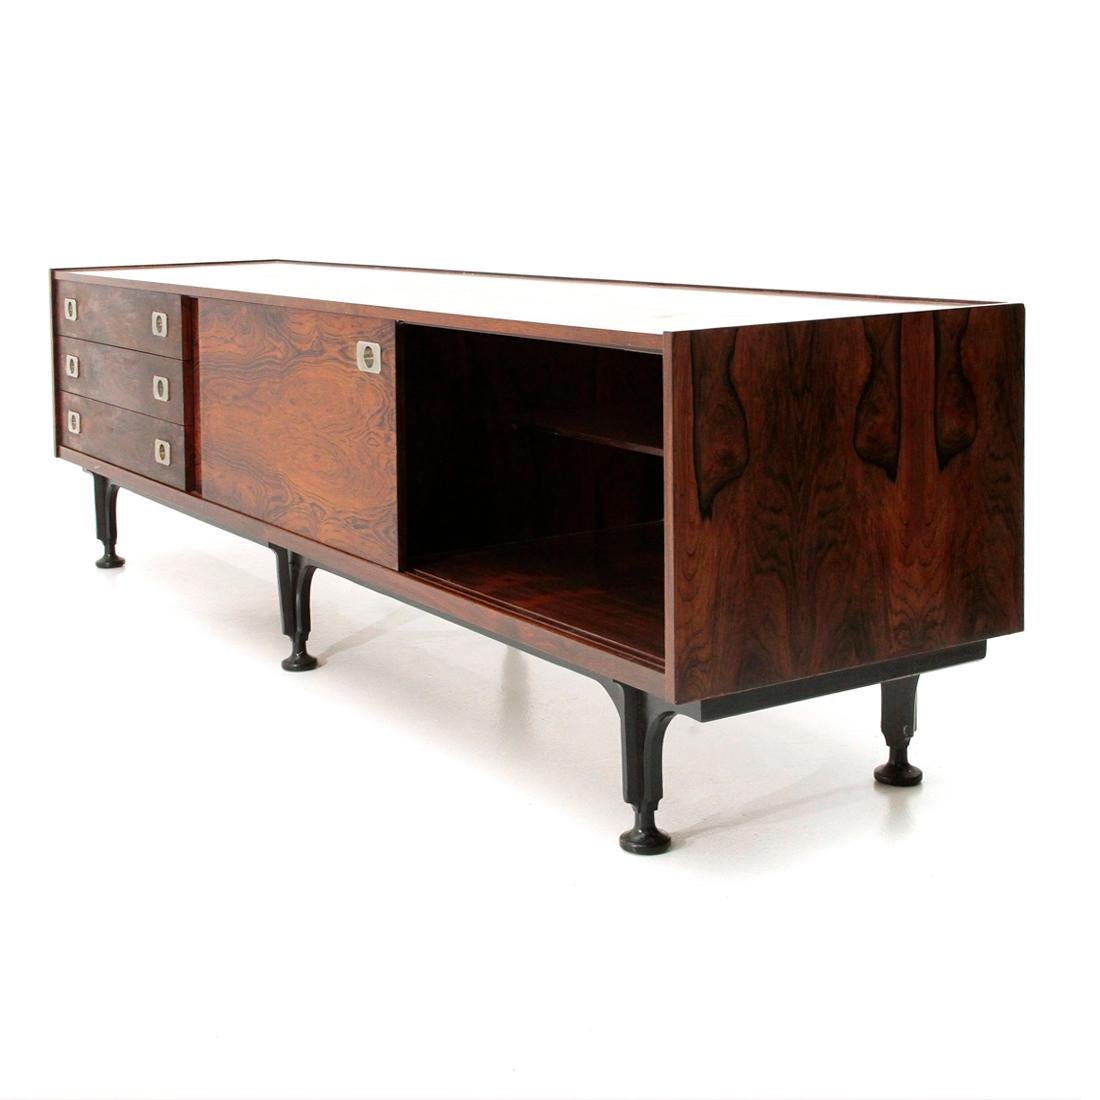 Mid-20th Century Italian Midcentury Sideboard with Chest of Drawers, 1960s